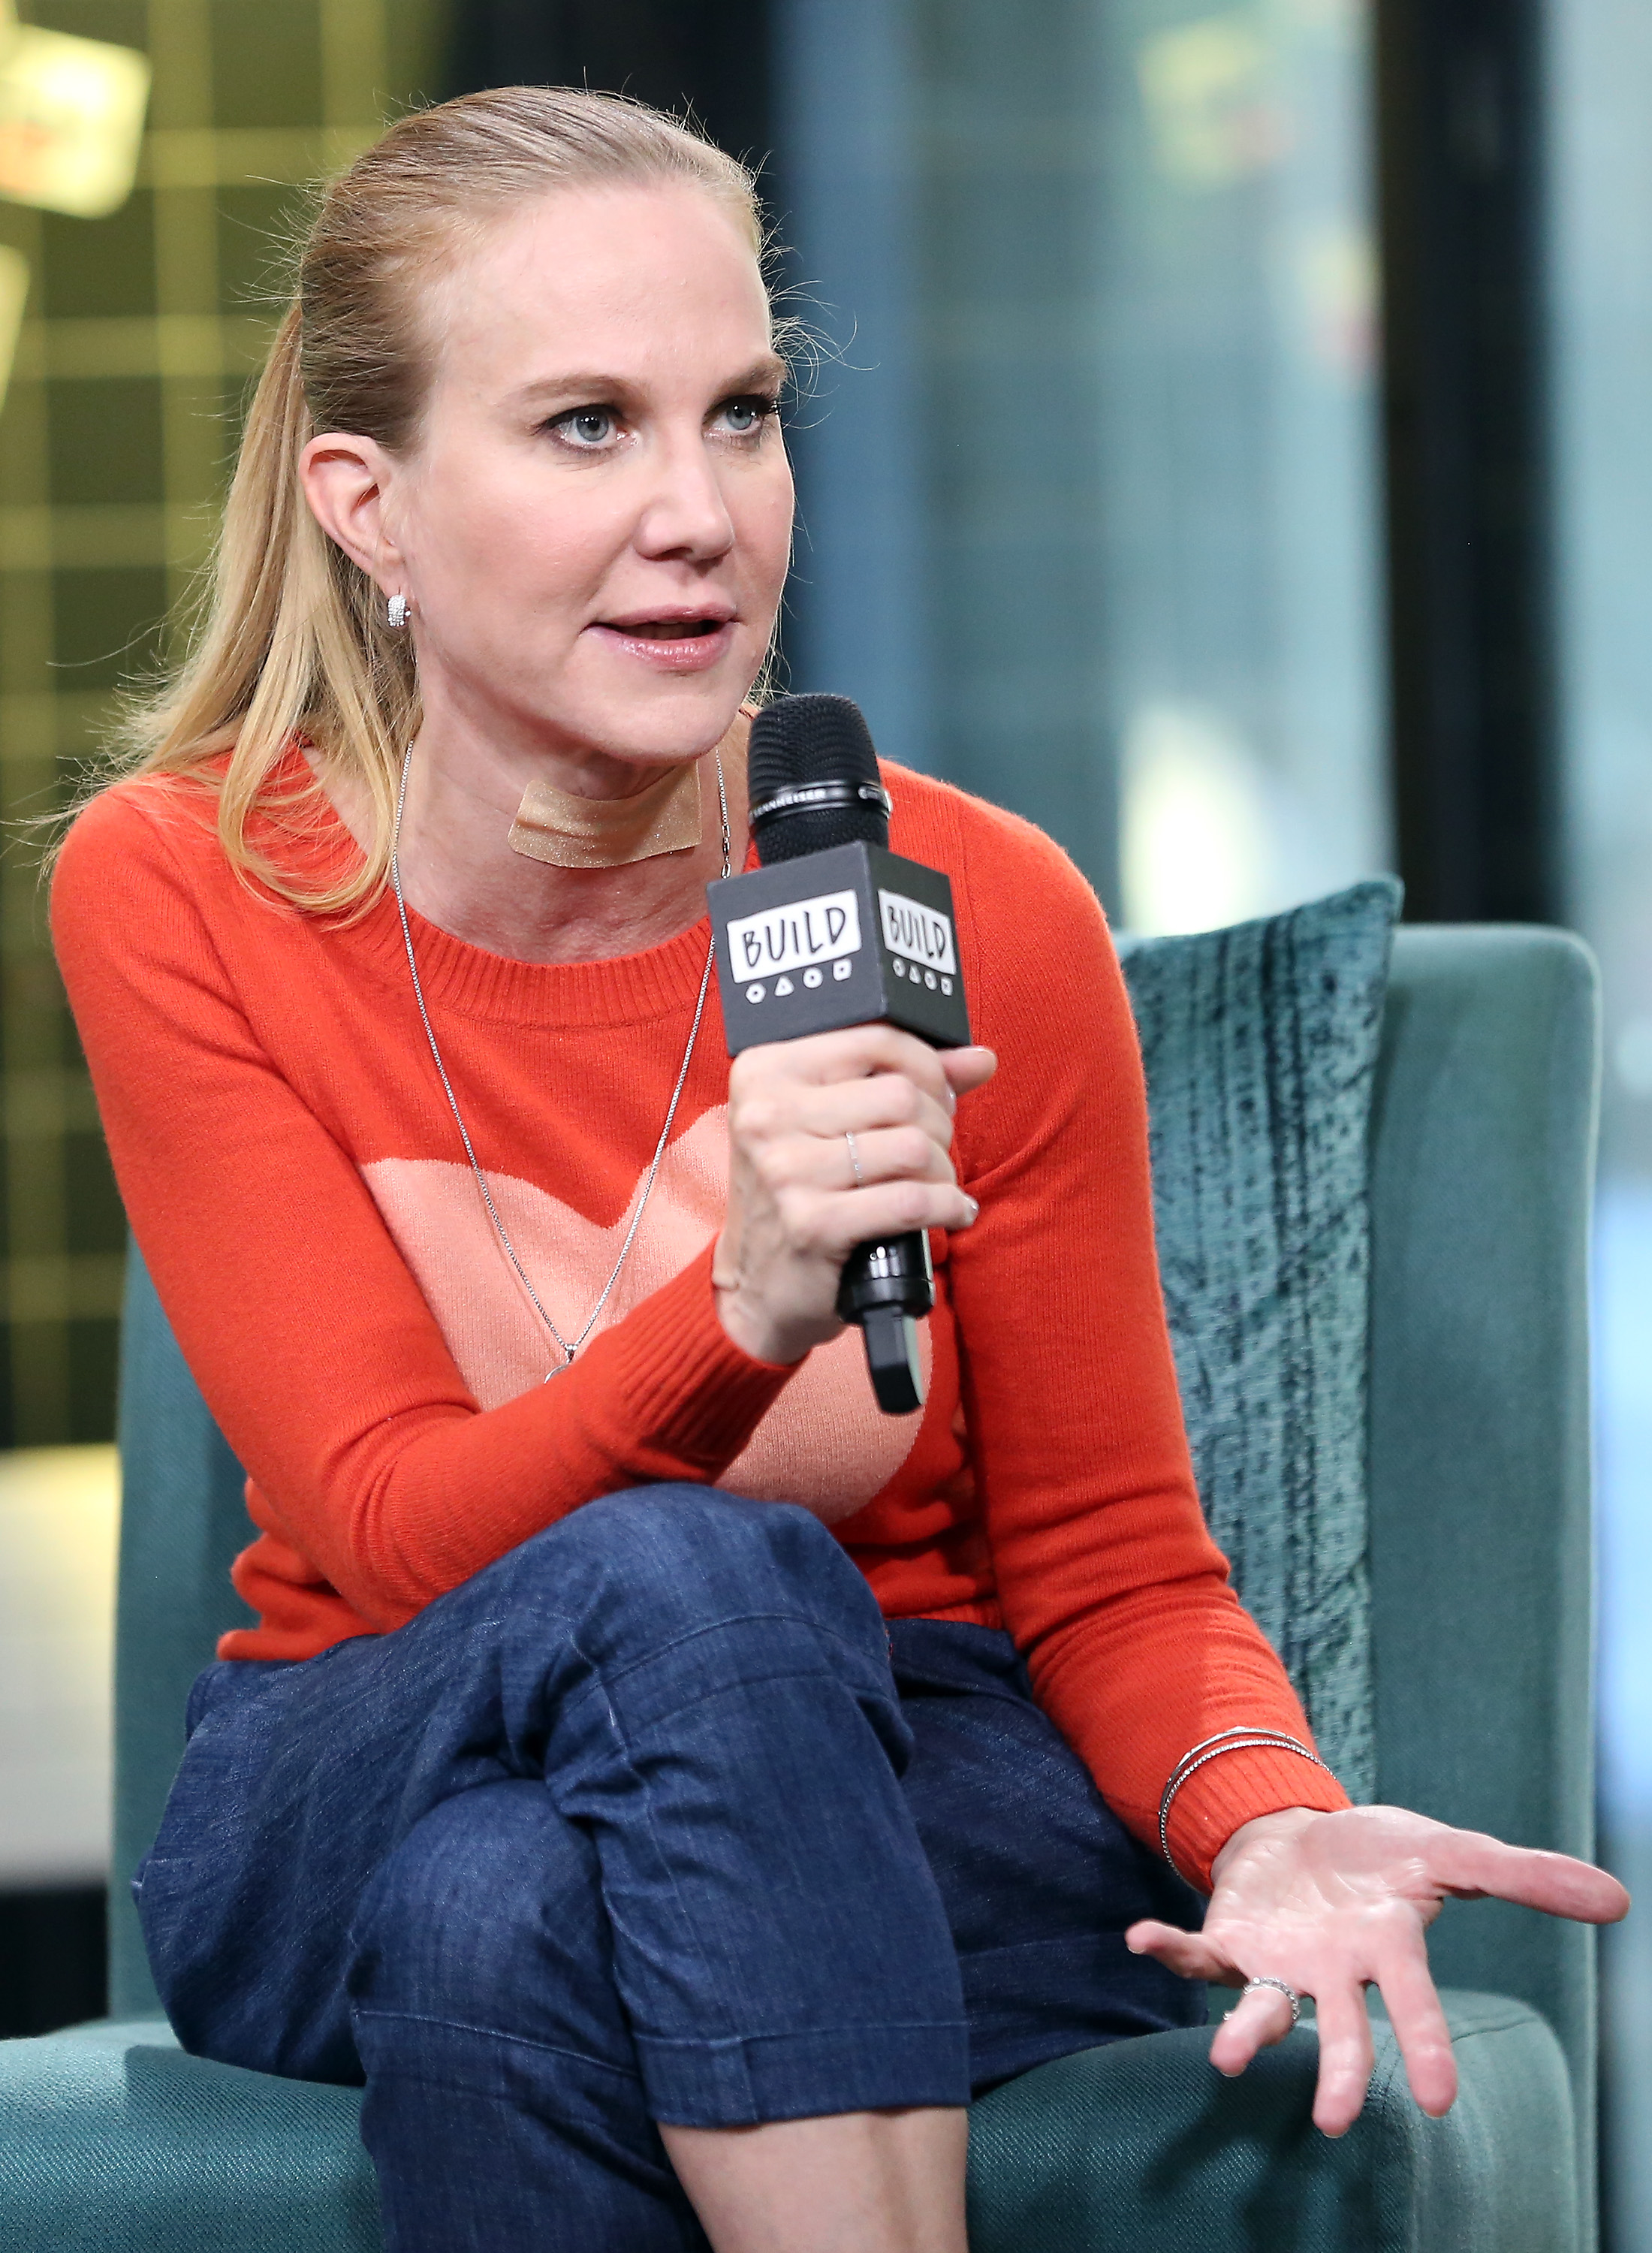 Jeannie Gaffigan visits Build Series to discuss her book "When Life Gives You Pears: The Healing Power of Family, Faith, and Funny People" on September 27, 2019, in New York City. | Source: Getty Images